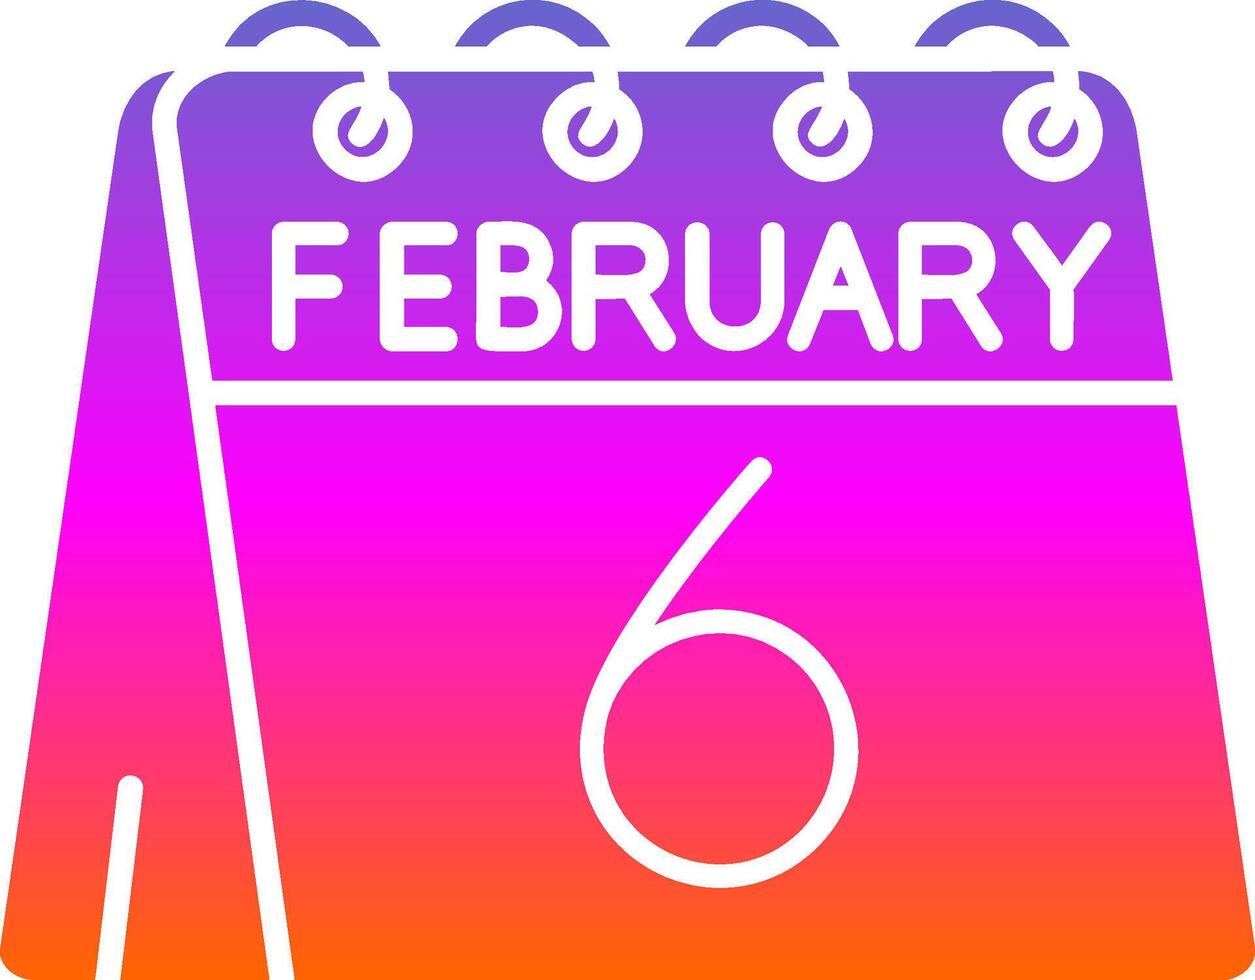 6th of February Glyph Gradient Icon vector